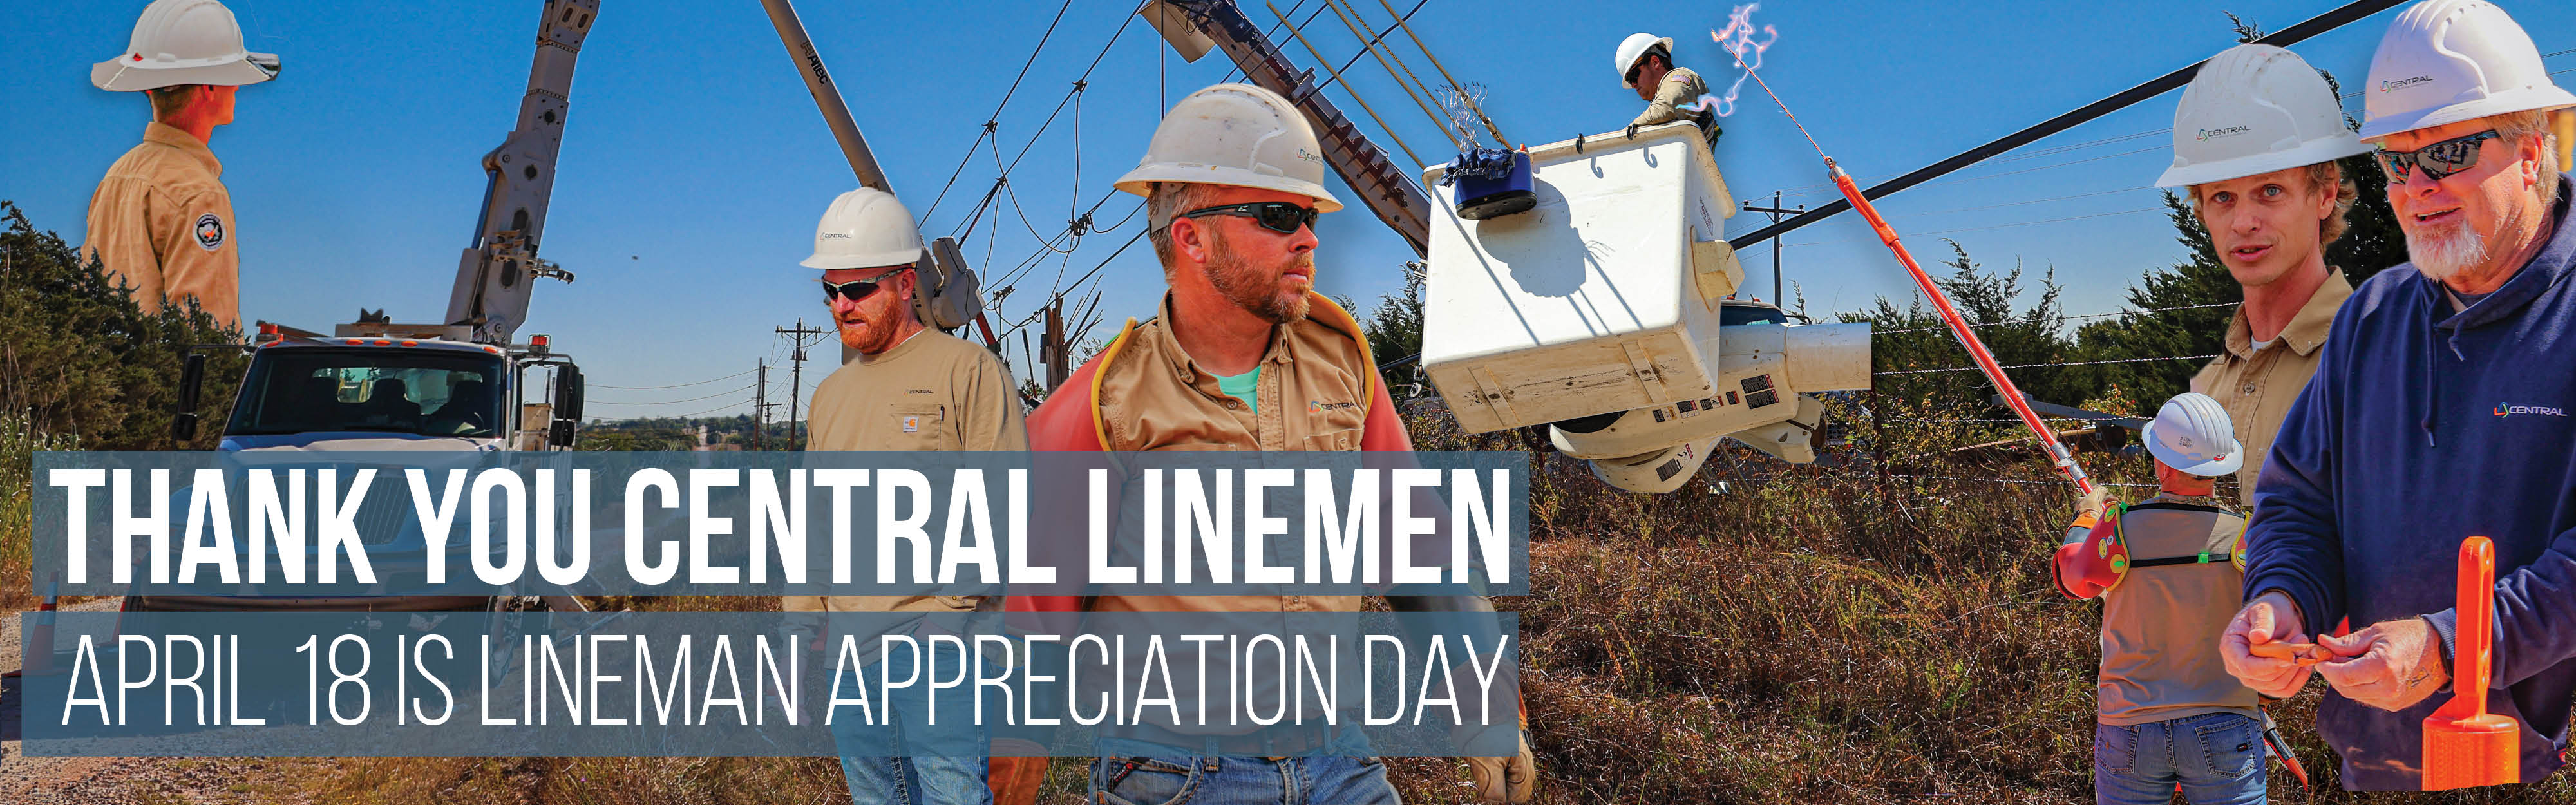 Thank you Central Linemen! April 18 is Lineman Appreciation Day